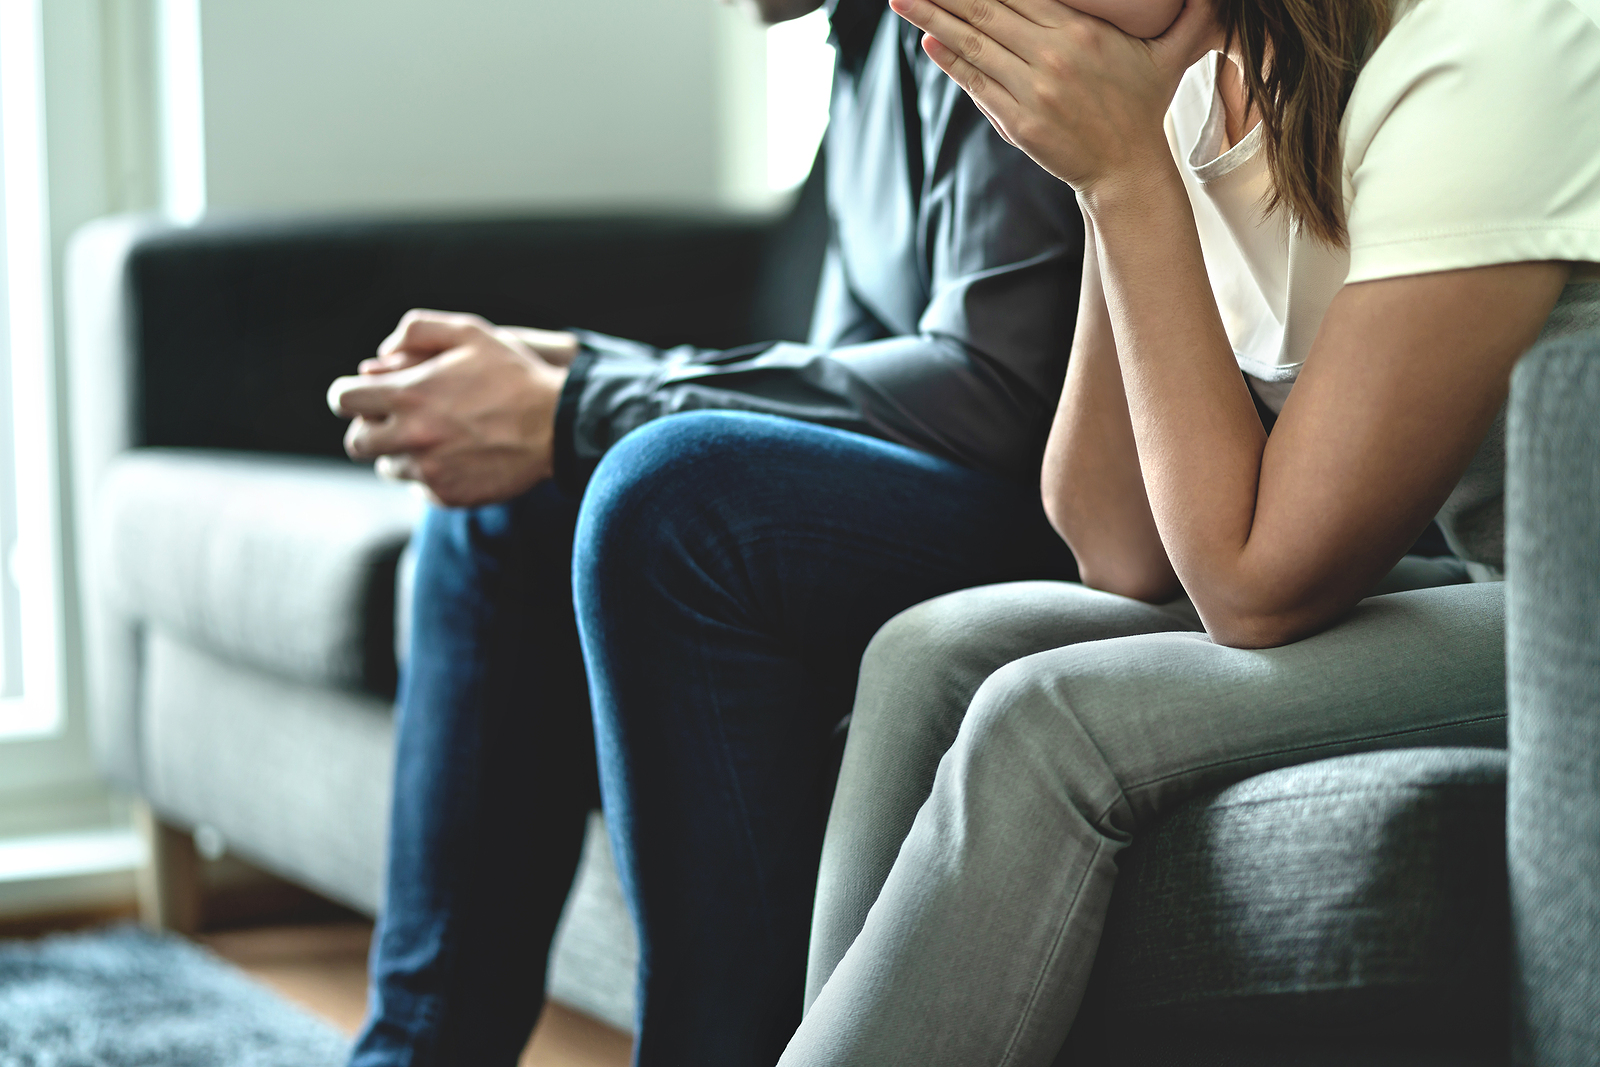 A woman sits next to a man on a couch while crying into her hands. Dealing with emotional abuse and wanting to move past it? Our trauma therapist in Austin, TX can help you.